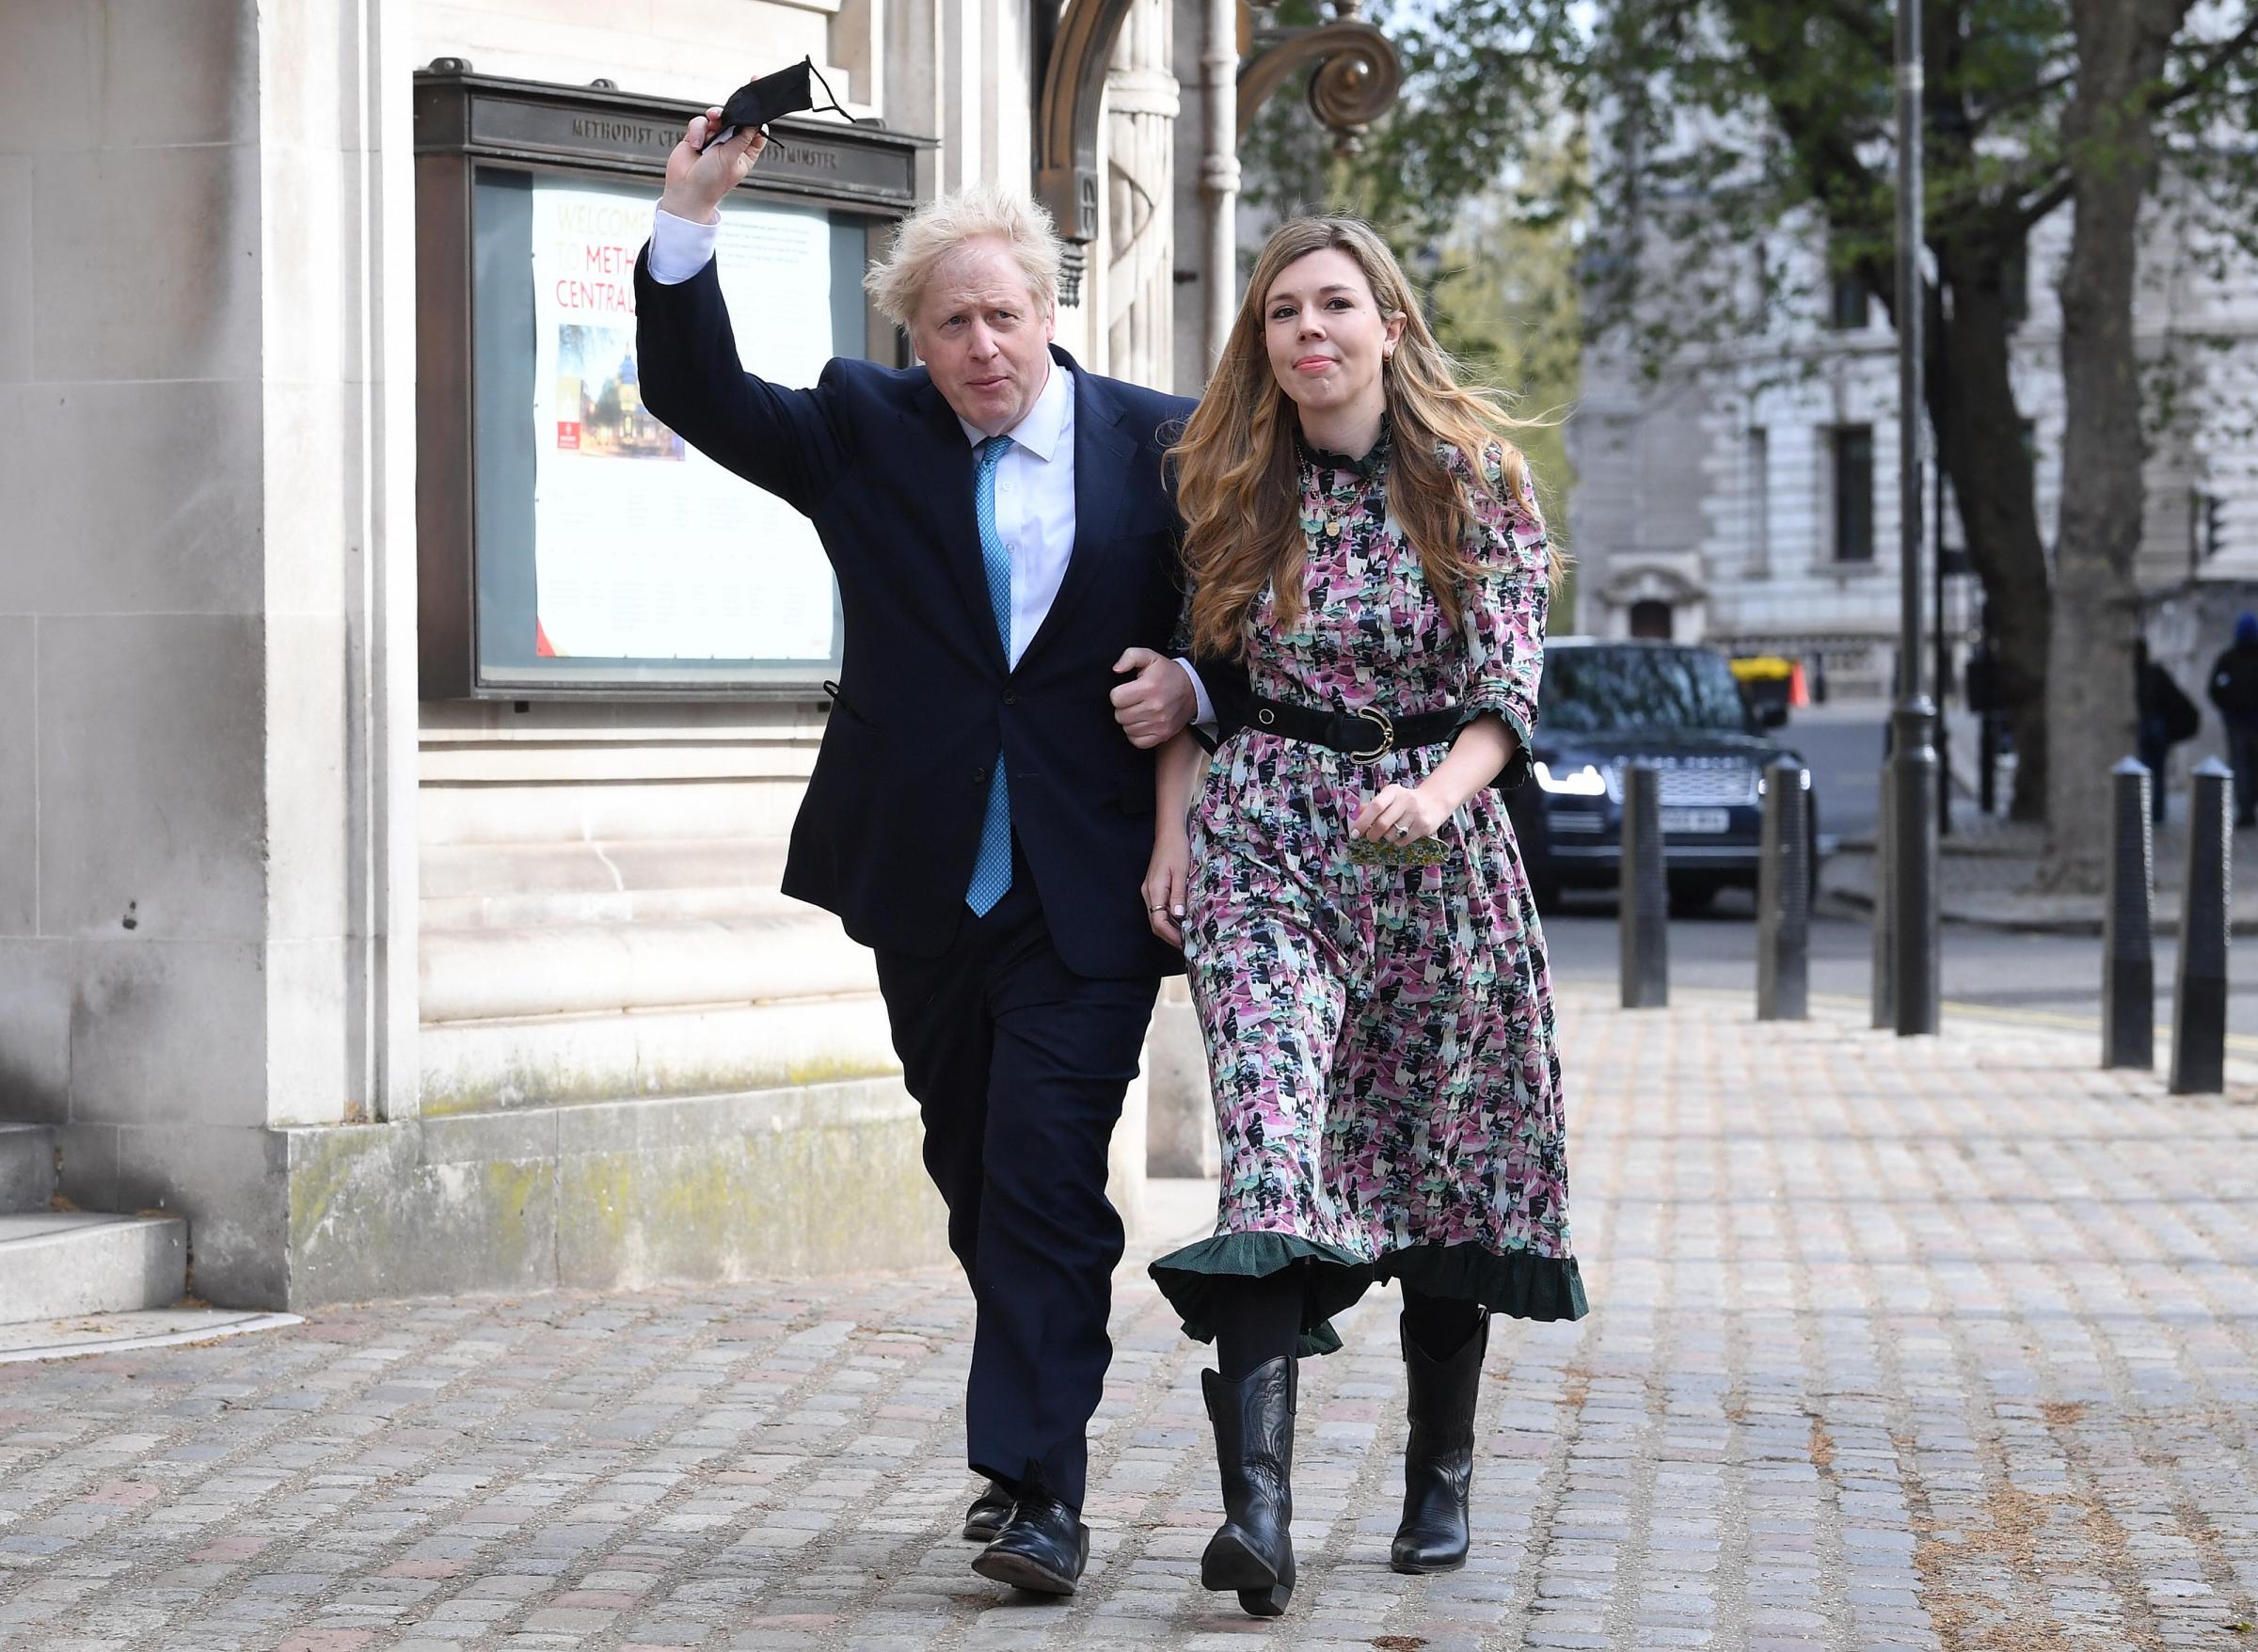 Boris Johnson is 'unfit' to be prime minister, two-thirds of Scots say